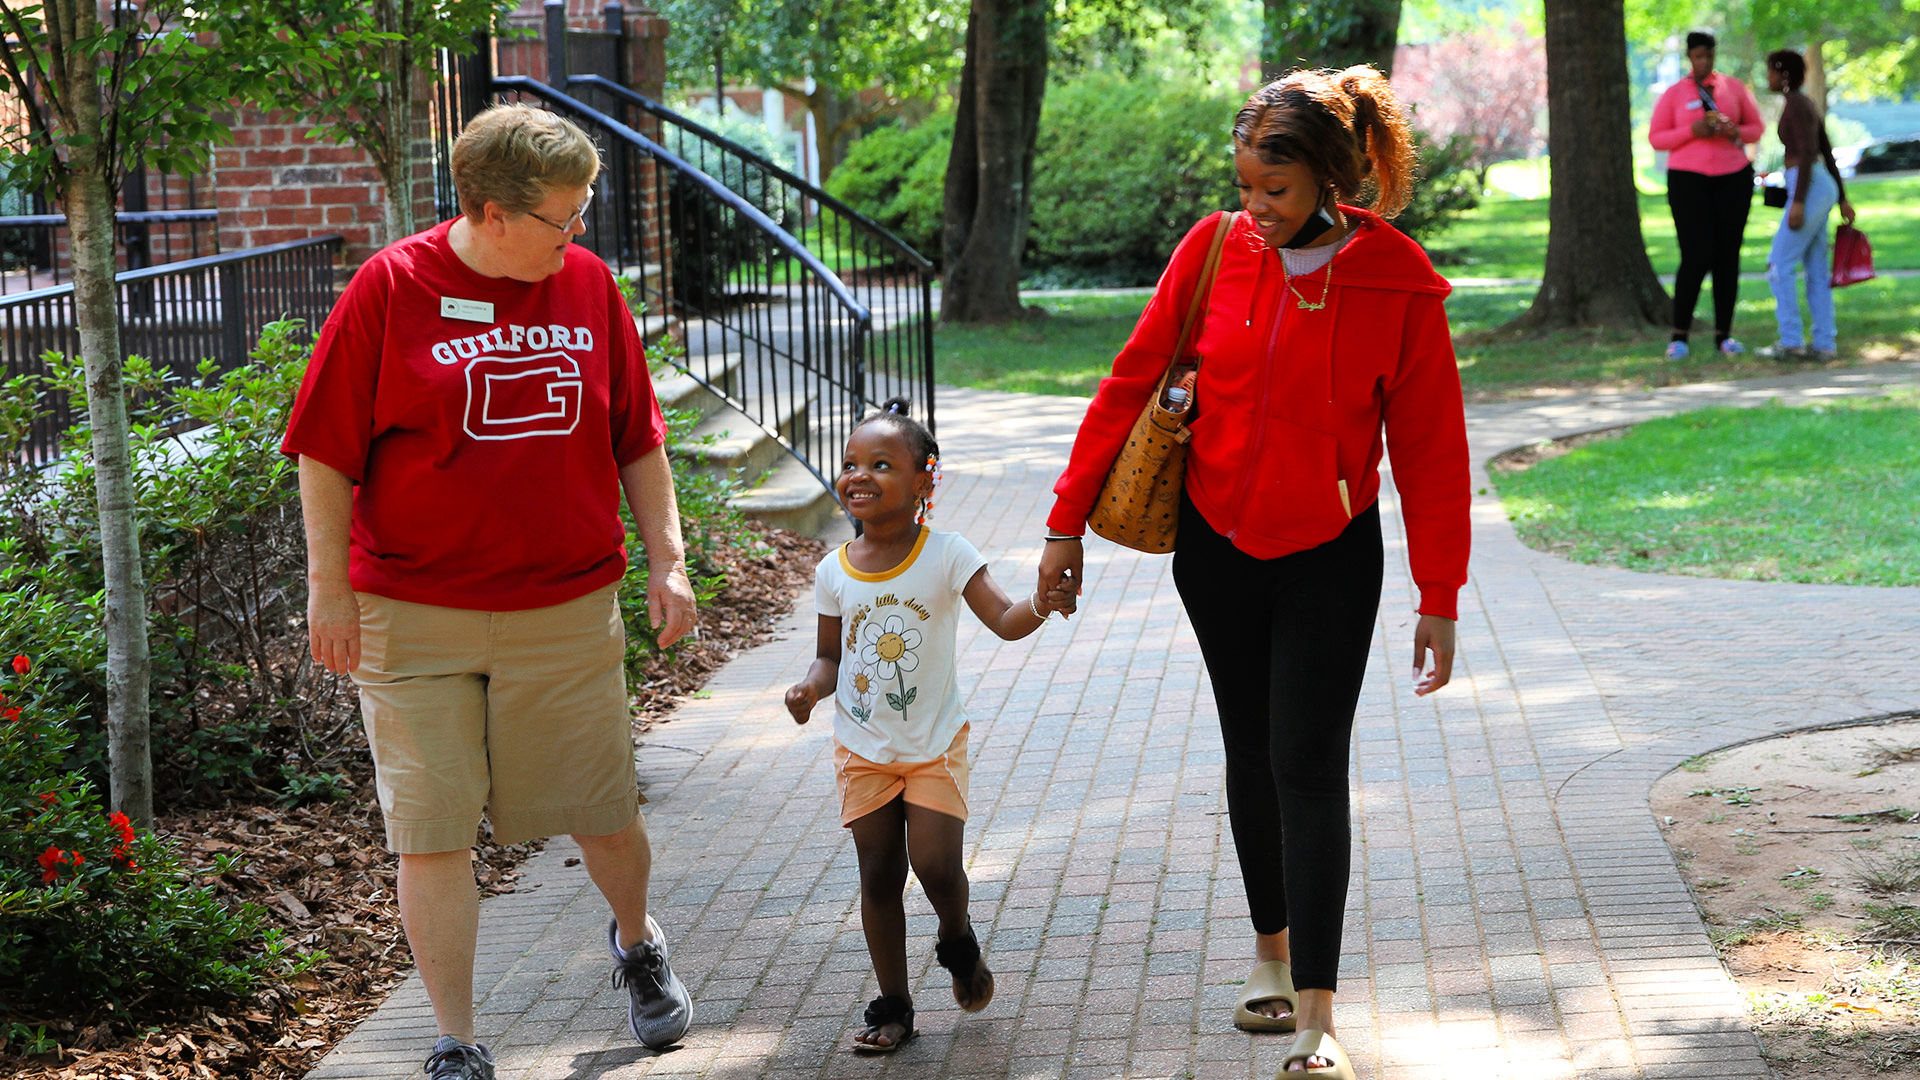 A staff member wearing a Guilford t-shirt walks and chats with a visitor and a small child on the Quad.